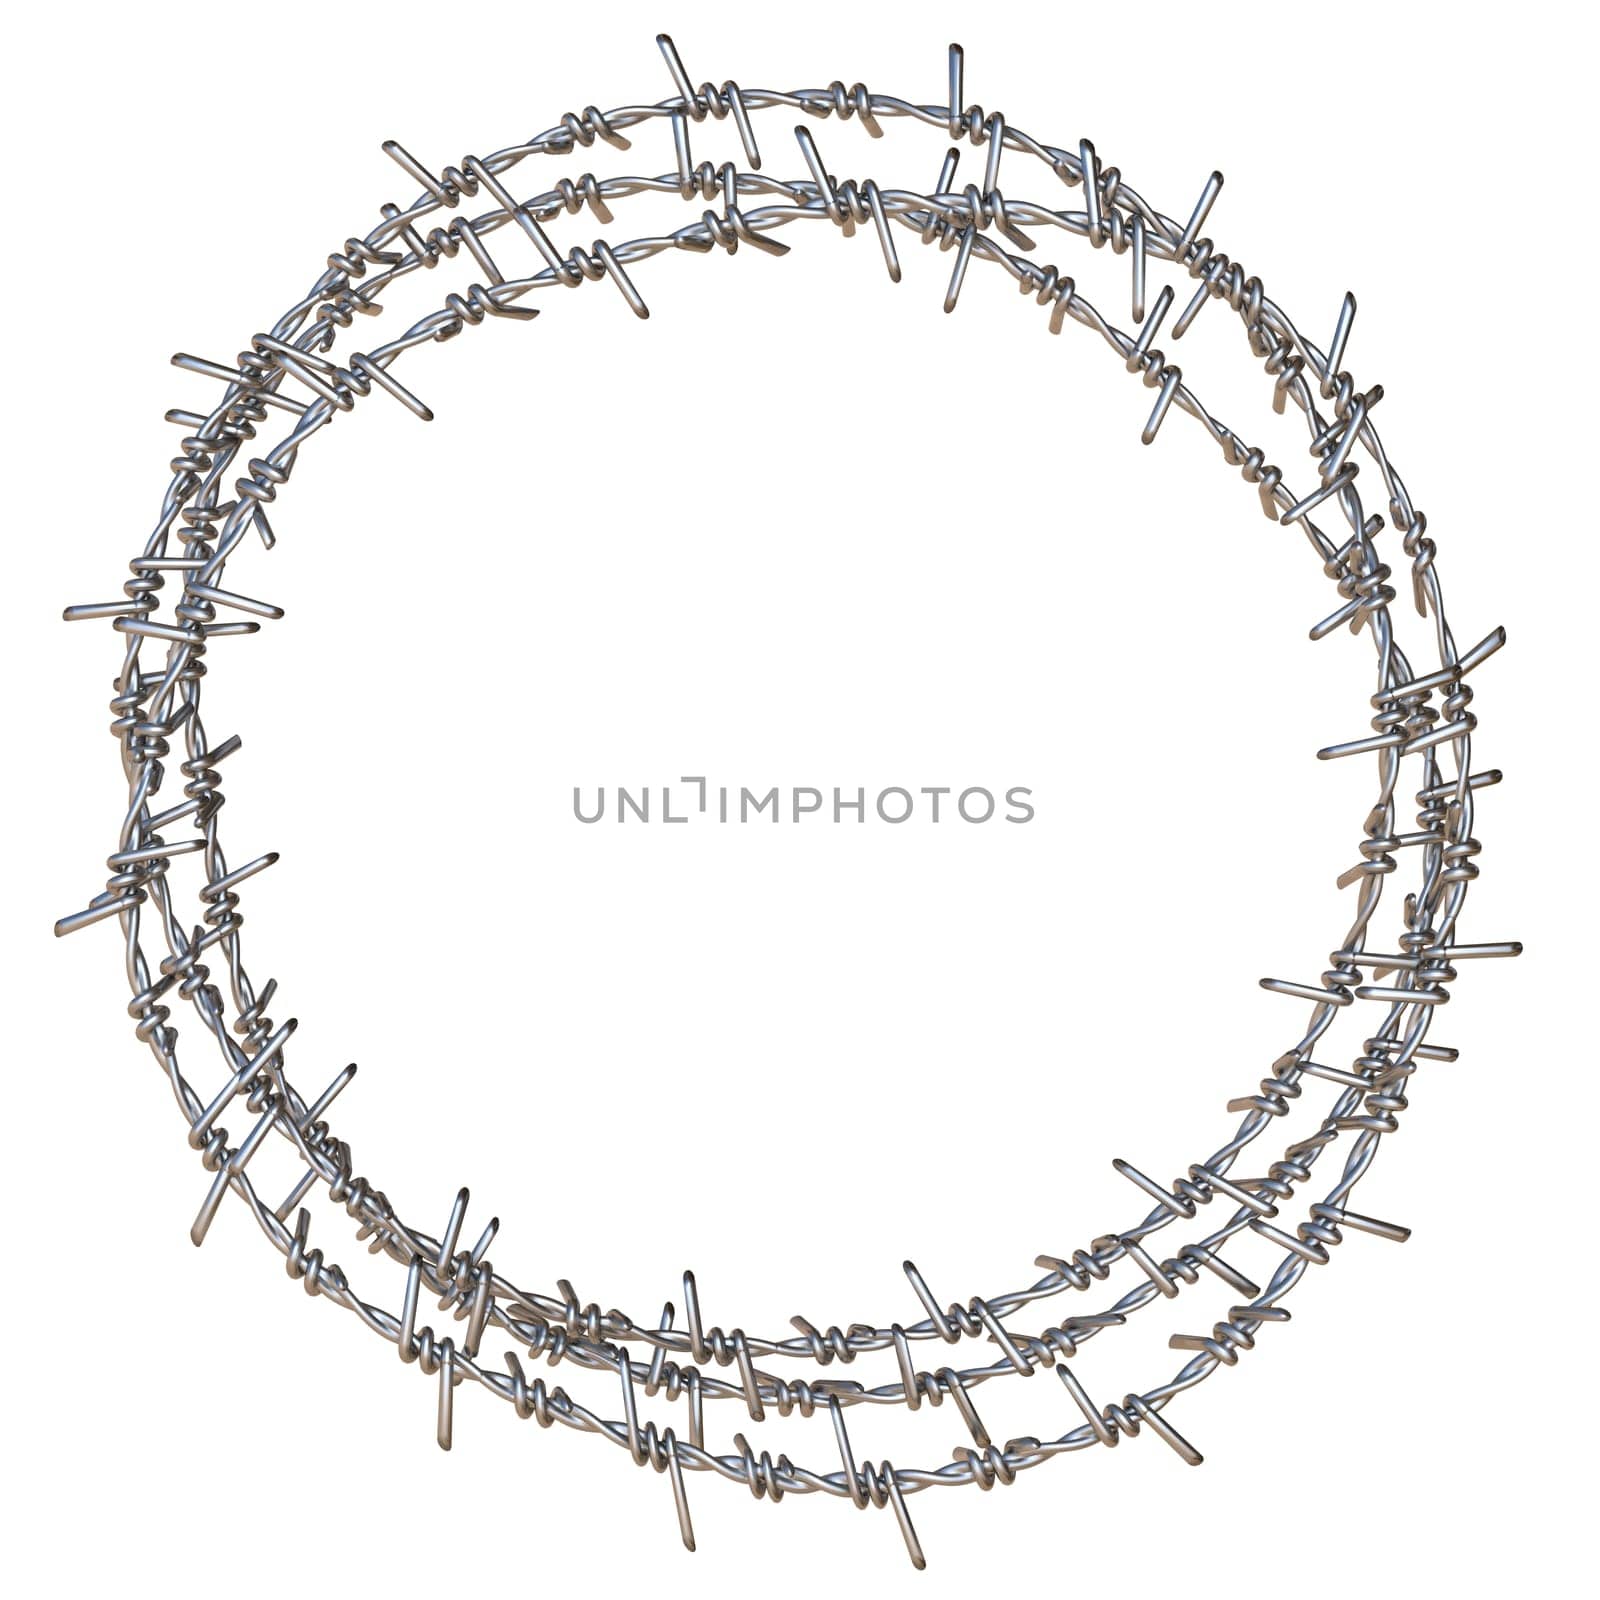 Barbed wire wreath 3D rendering illustration isolated on white background